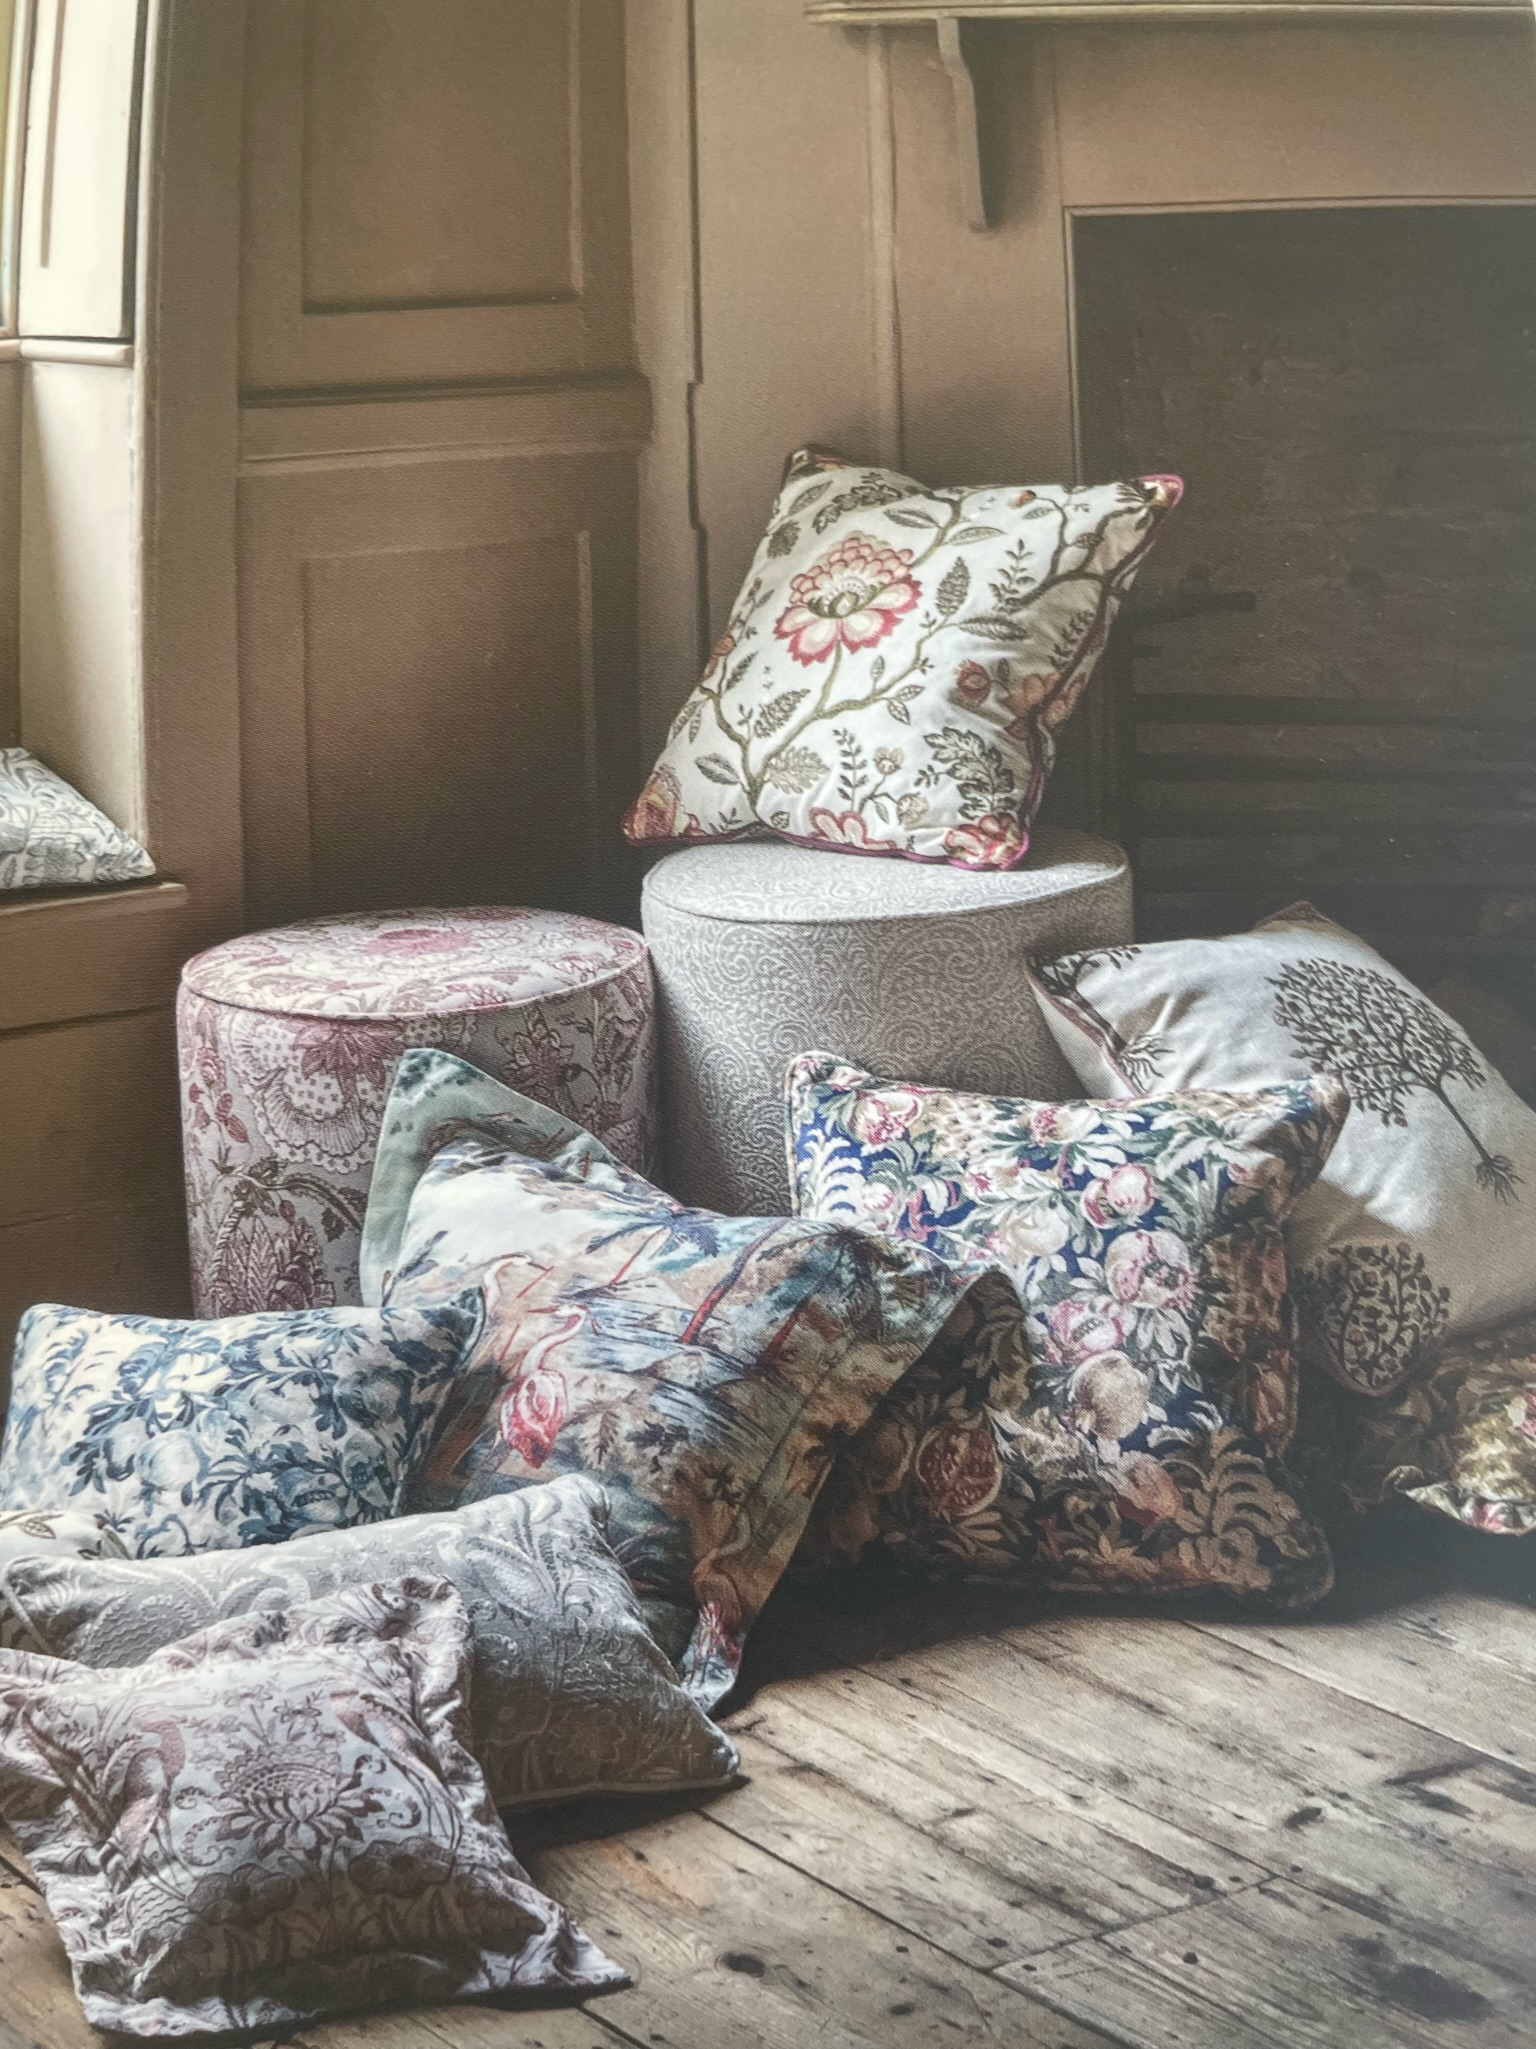 Collection of flowery pillows